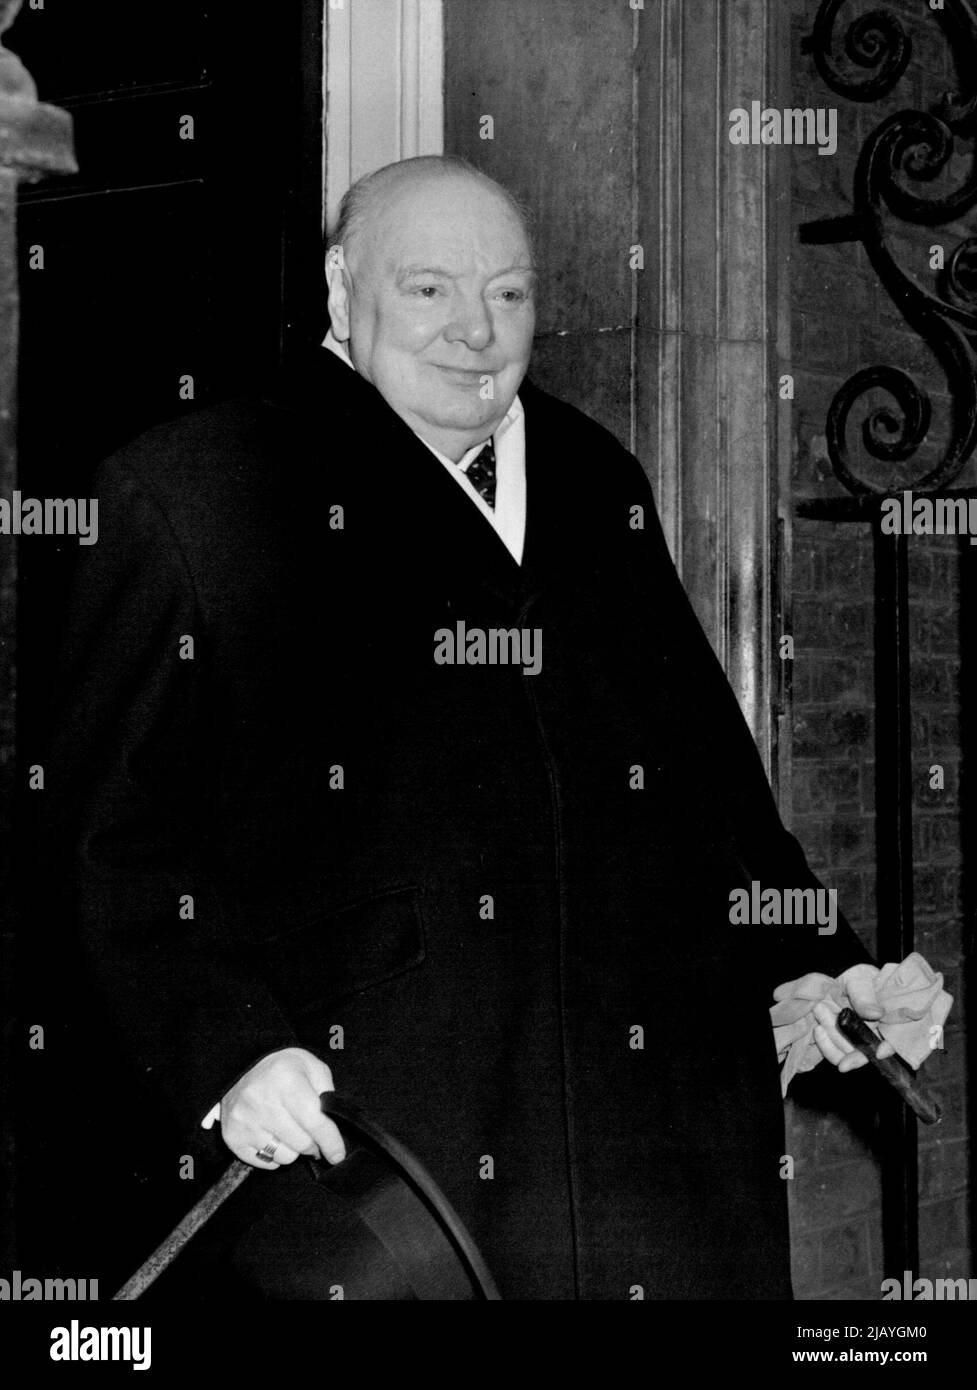 Premier Fit and Well Again -- Looking fighting fit and completely recover from his cold Sir Winston Churchill is seen leaving No.10, Downing Street this afternoon.  Sir Winston Churchill who has been suffering from a cold which has kept him indoors for the past few days, has now completely recovered and looked fit and well went he left No.10, Downing Street for the House this afternoon, after Mrs. Roosevelt had lunched with him. March 10, 1955. (Photo by Fox Photos). Stock Photo